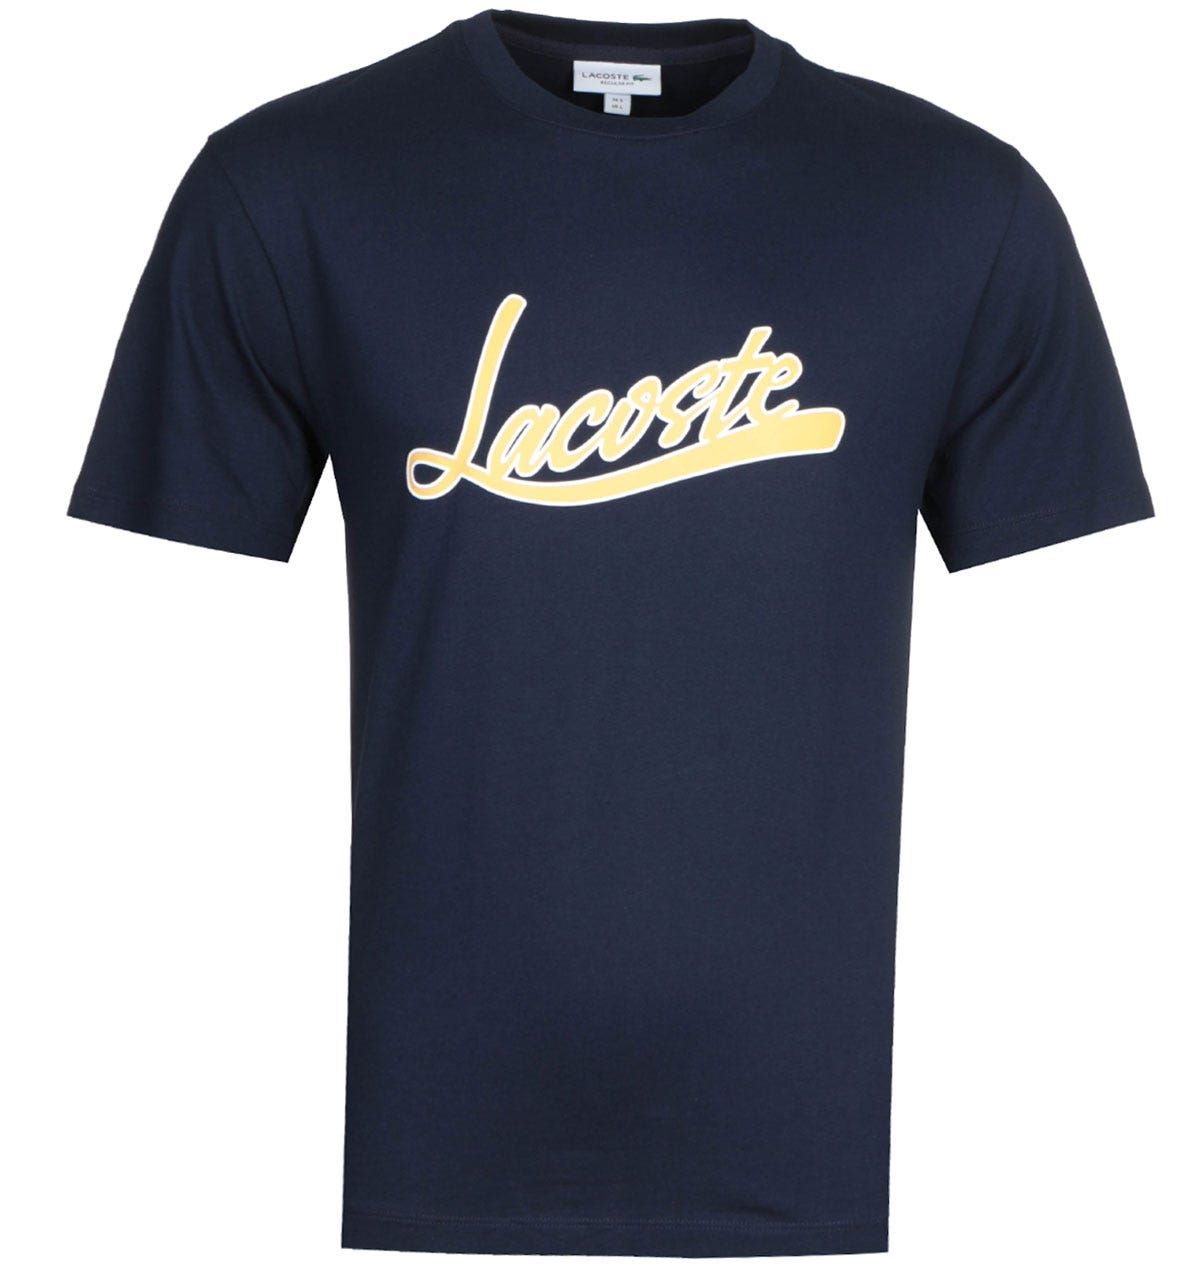 <p>A pure cotton composition, crafted by Lacoste. The Lacoste Homme Navy Logo T-Shirt is a lightweight garment, fitted with a crew neck and ribbed trims. This iconic design is finished with the Lacoste logo embossed at the chest.</p><ul><li>Cotton composition</li><li>Crew neck</li><li>Ribbed trims</li><li>Lacoste logo embossed on chest</li></ul><p>Style & Fit:</p><ul><li>Regular fit</li><li>Fits true to size</li></ul><p>Fabric Composition & Care:</p><ul><li>100% Cotton</li><li>Machine washable</li></ul>